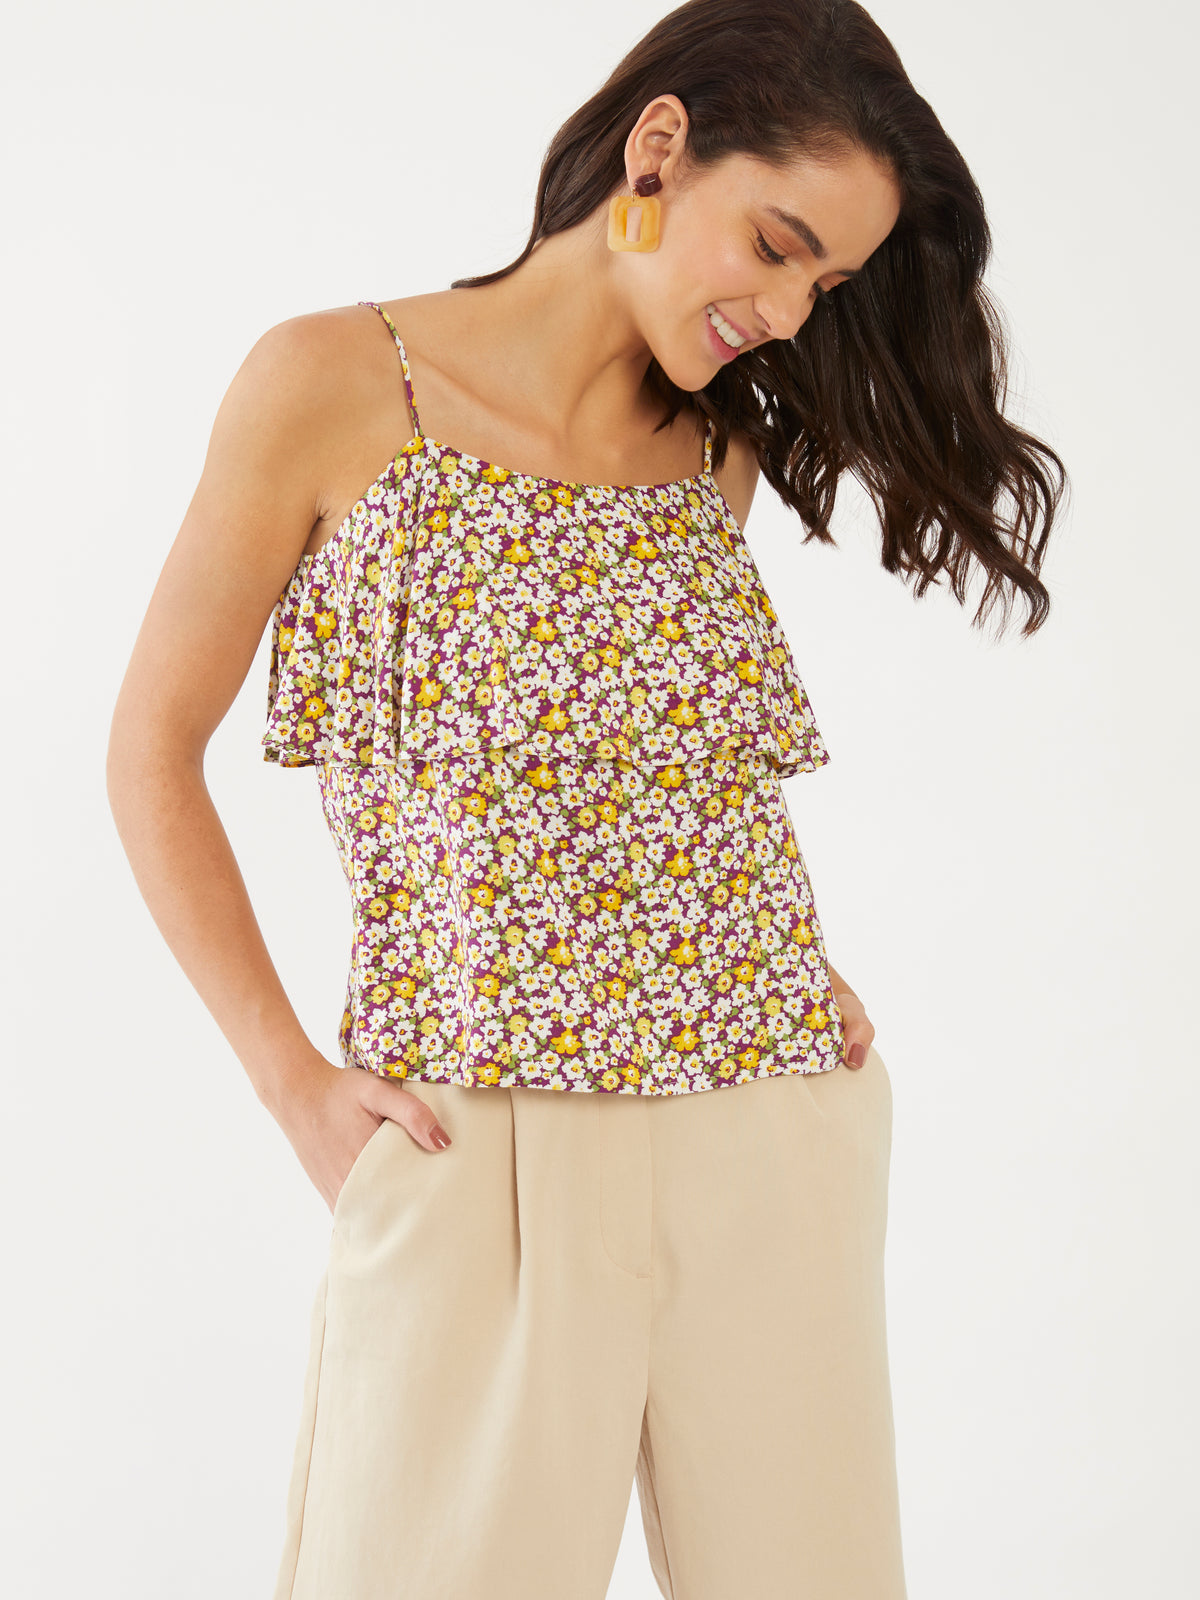 Multicolored Floral Print Strappy Top For Women